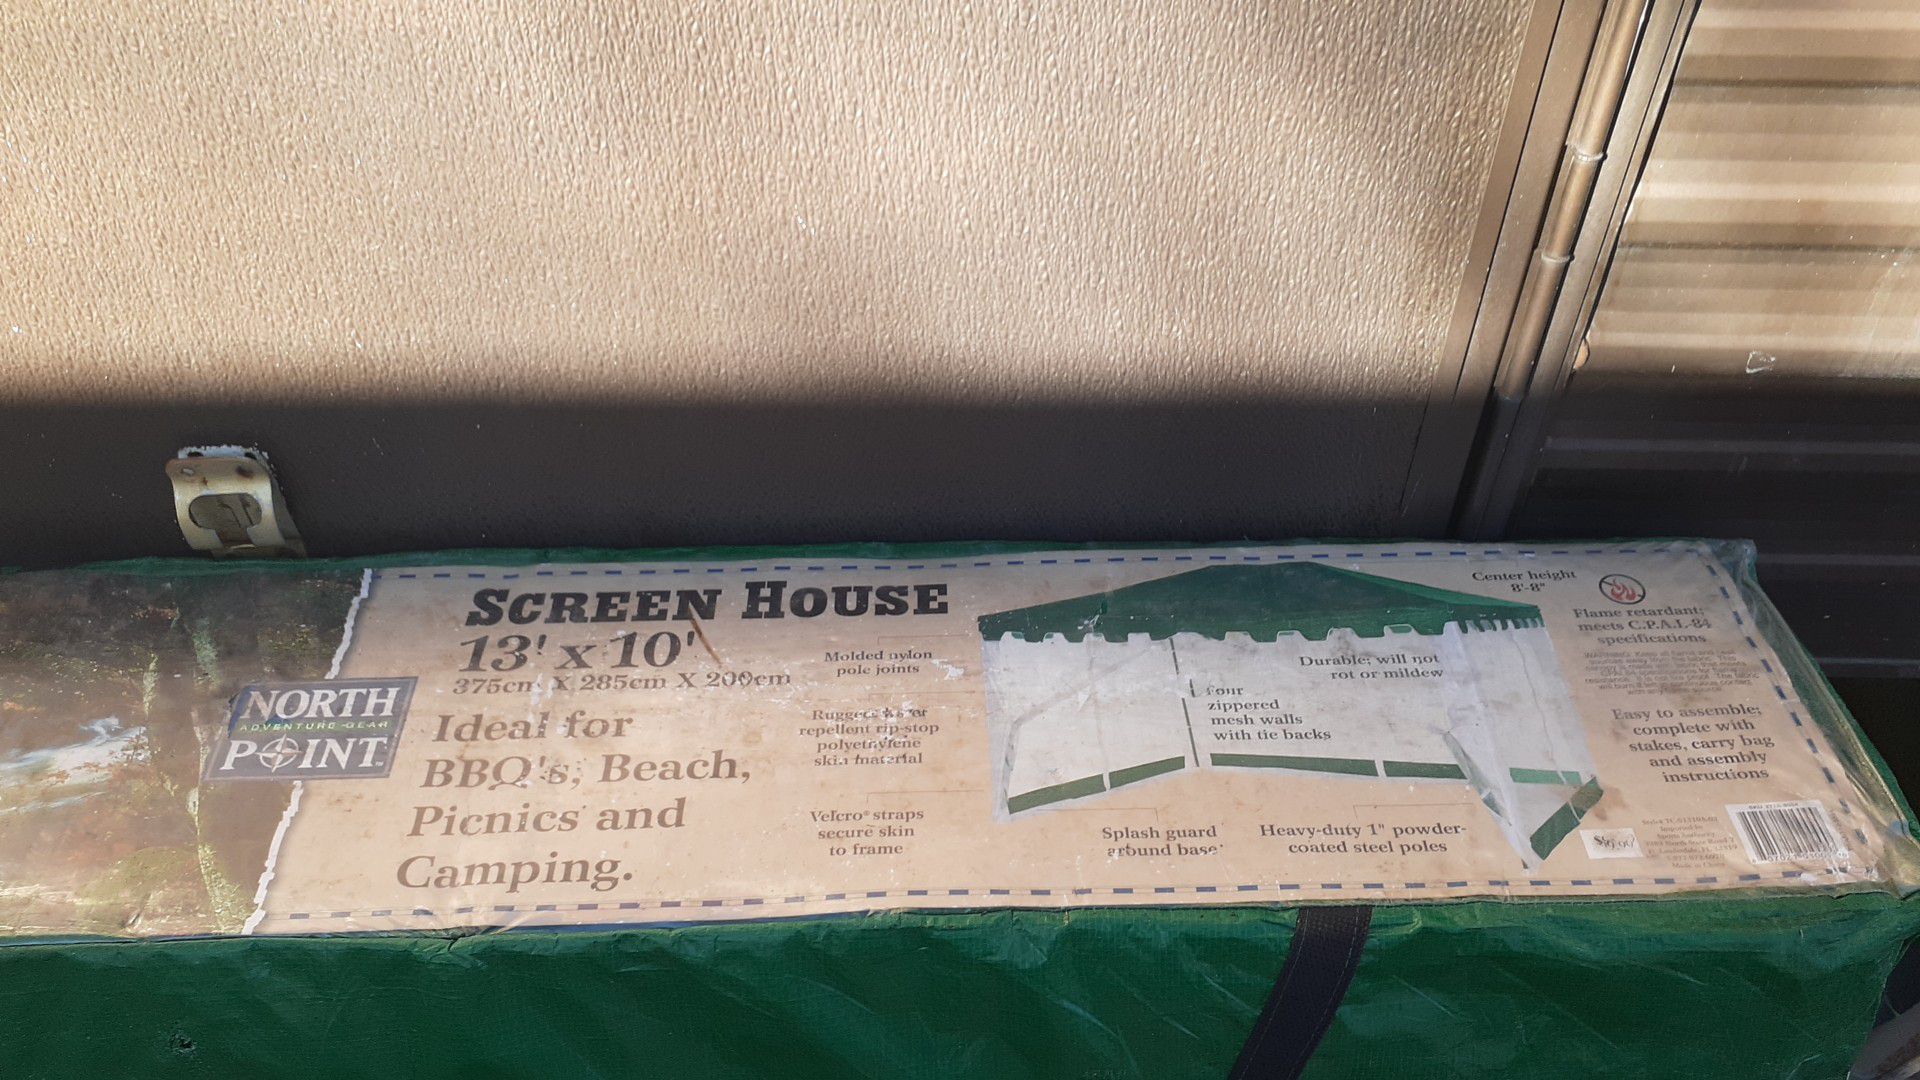 Screen house 13 by 10 never put up price on box $99.99